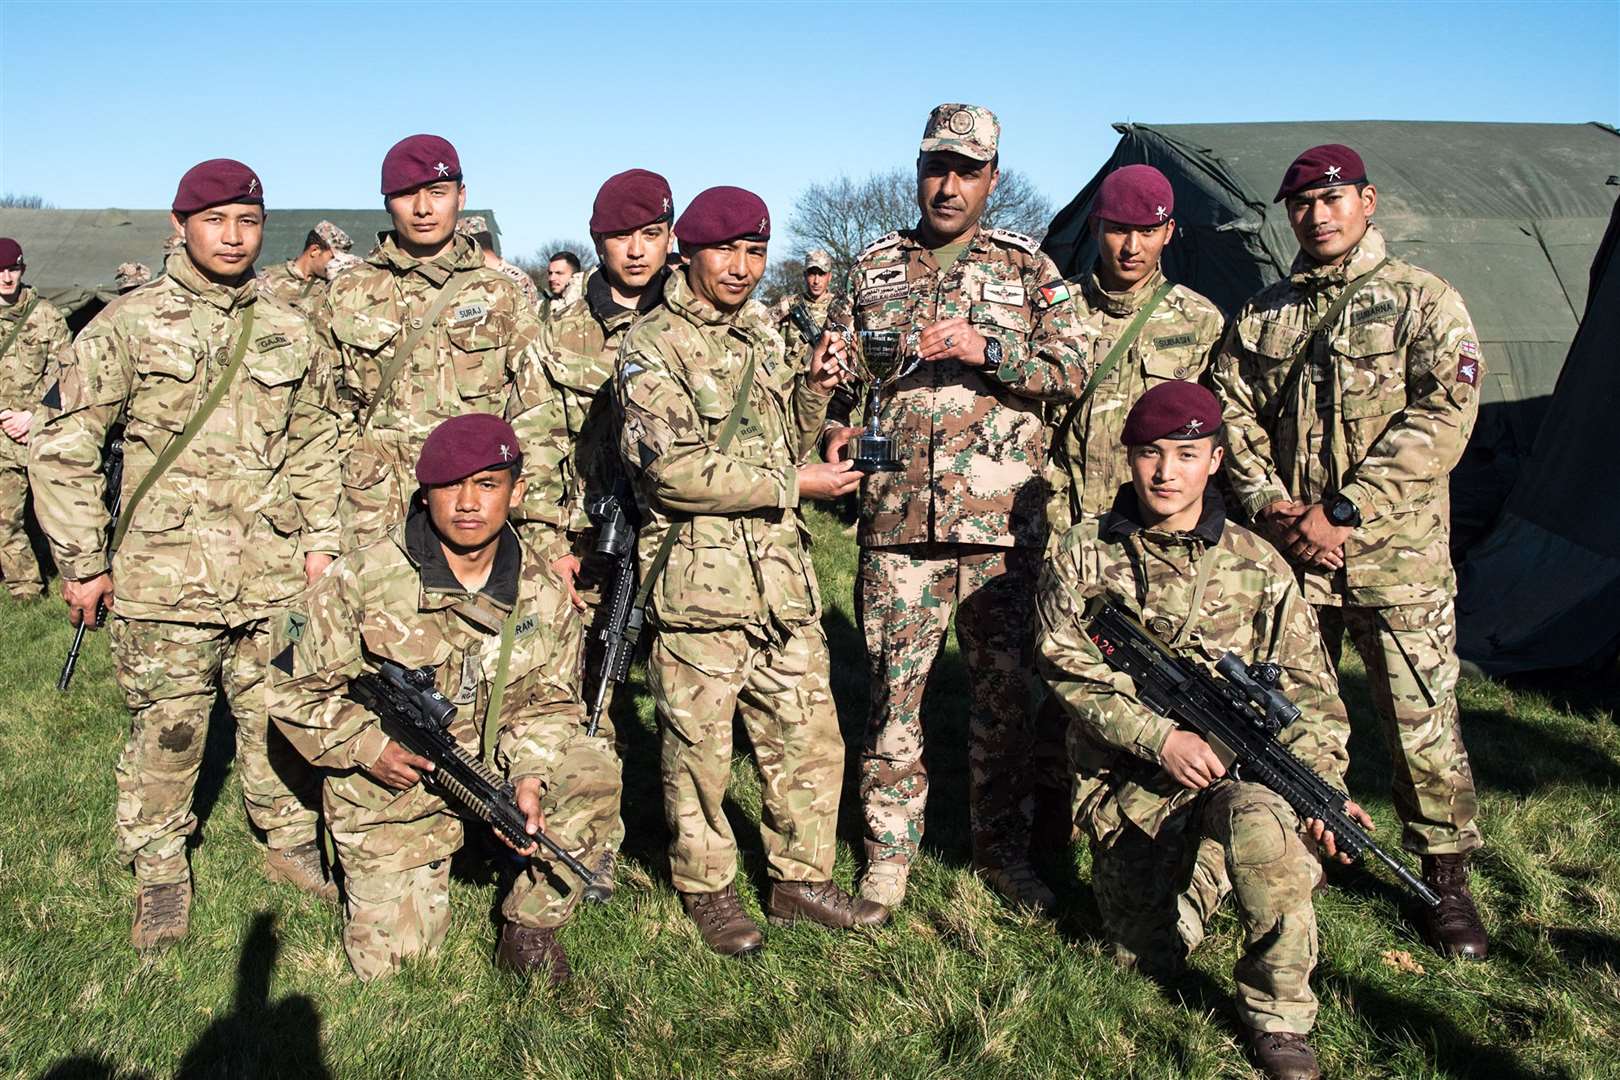 Soldiers from Folkestone based Royal Gurkha Rifles win in brigade shooting competition held in Essex in 2017. Credit Cpl Darren Legg RLC / MoD: